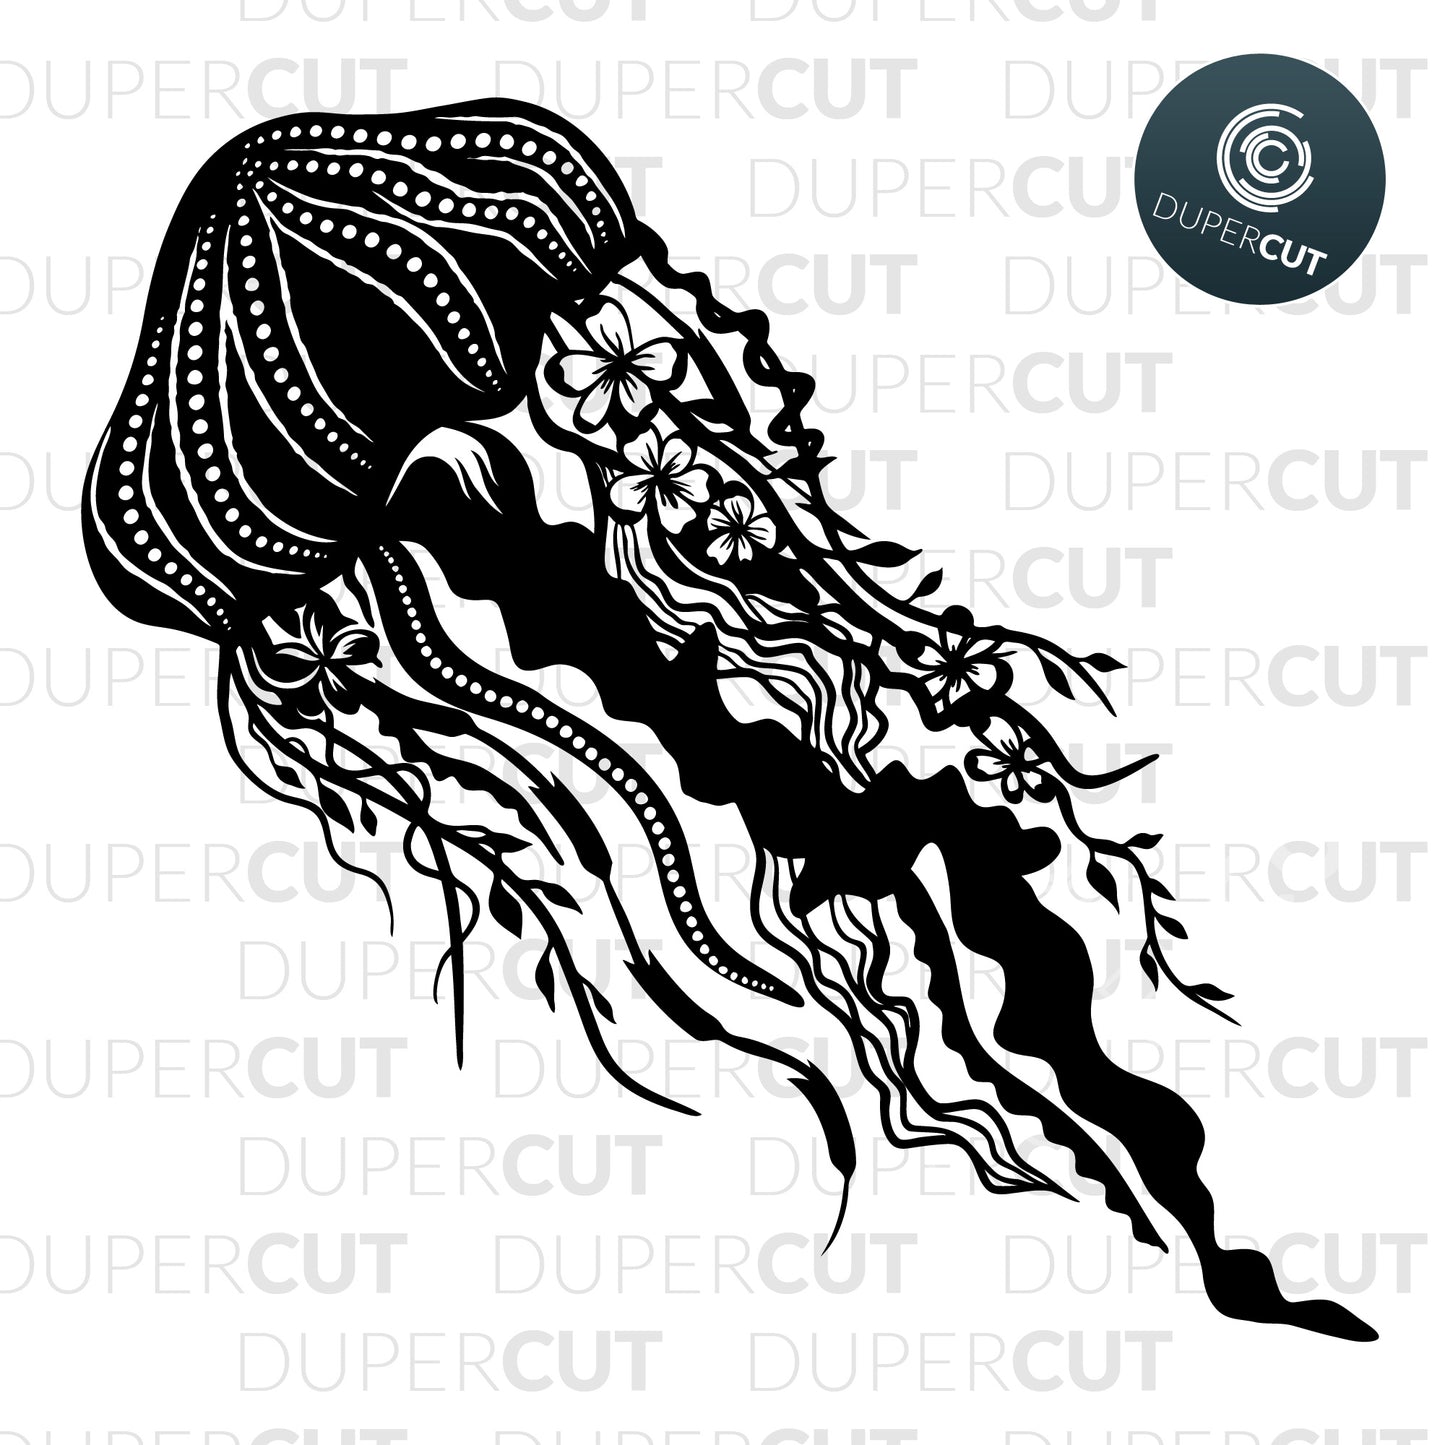 Jellyfish with leaves and flowers. Paper cutting template for personal or  commercial use. SVG files for Silhouette Cameo, Cricut, Glowforge, DXF for CNC, laser cutting, print on demand